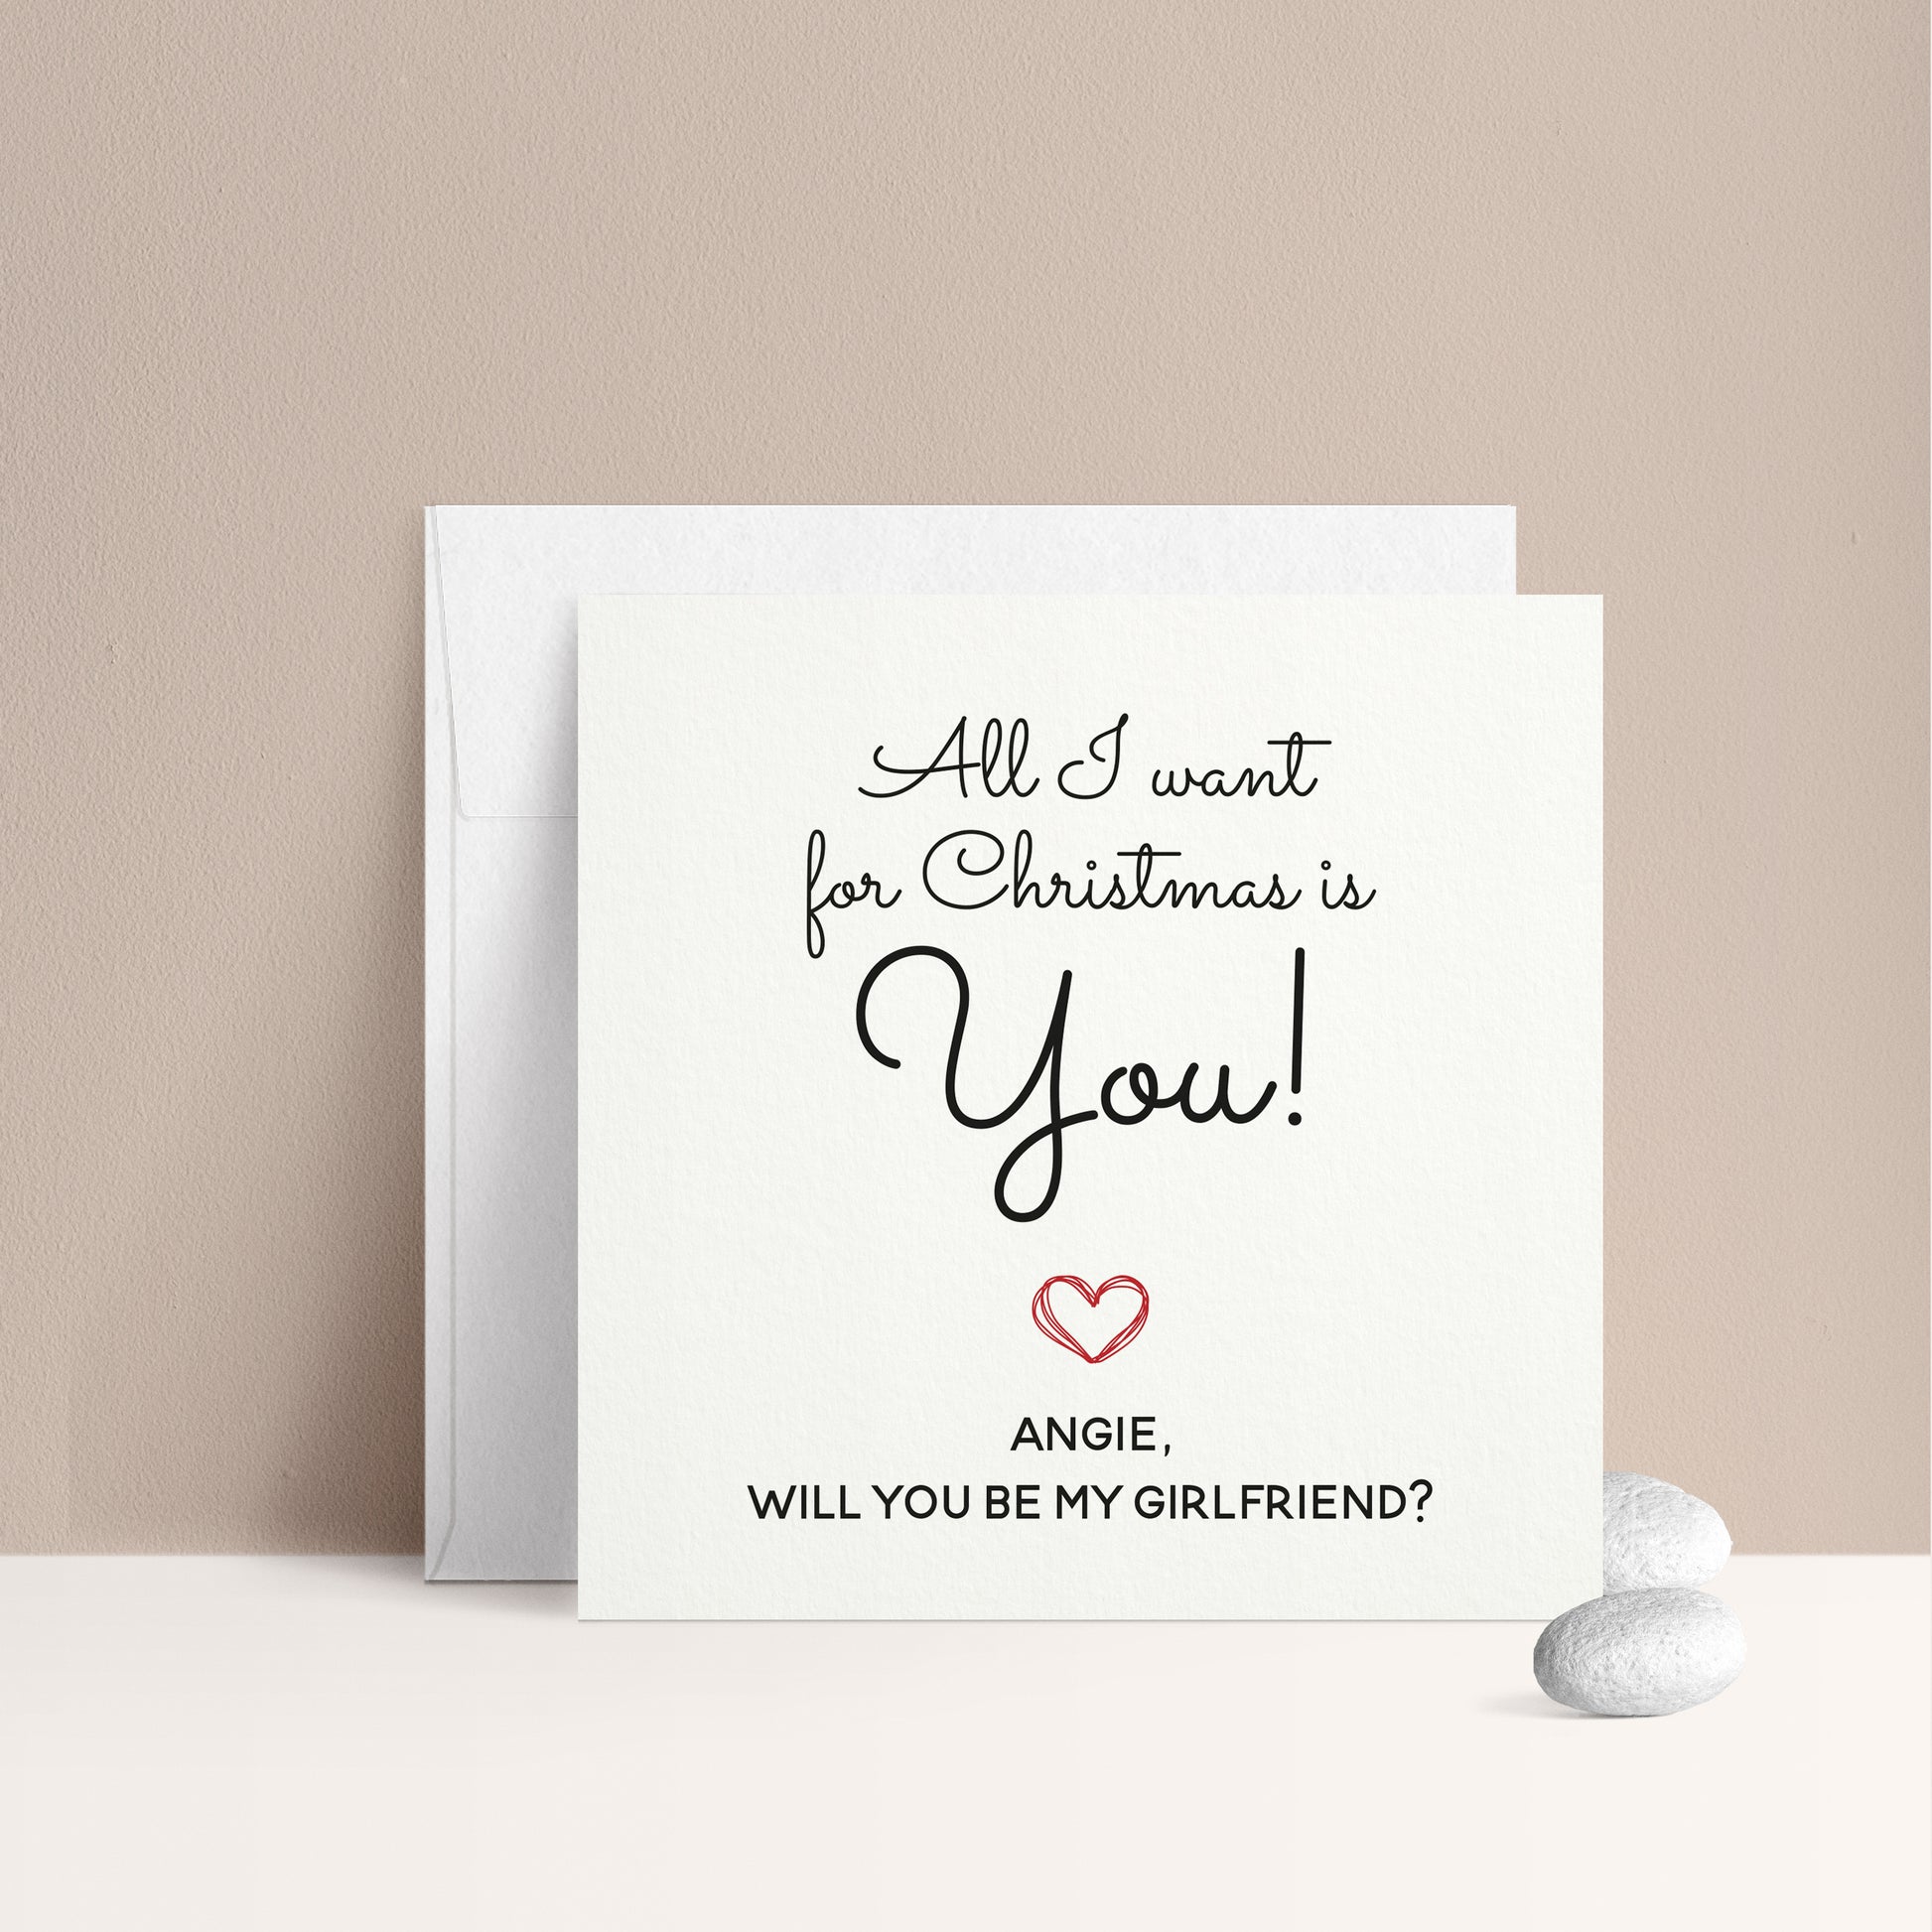 all I want for christmas is you girlfriend proposal card - XOXOKristen